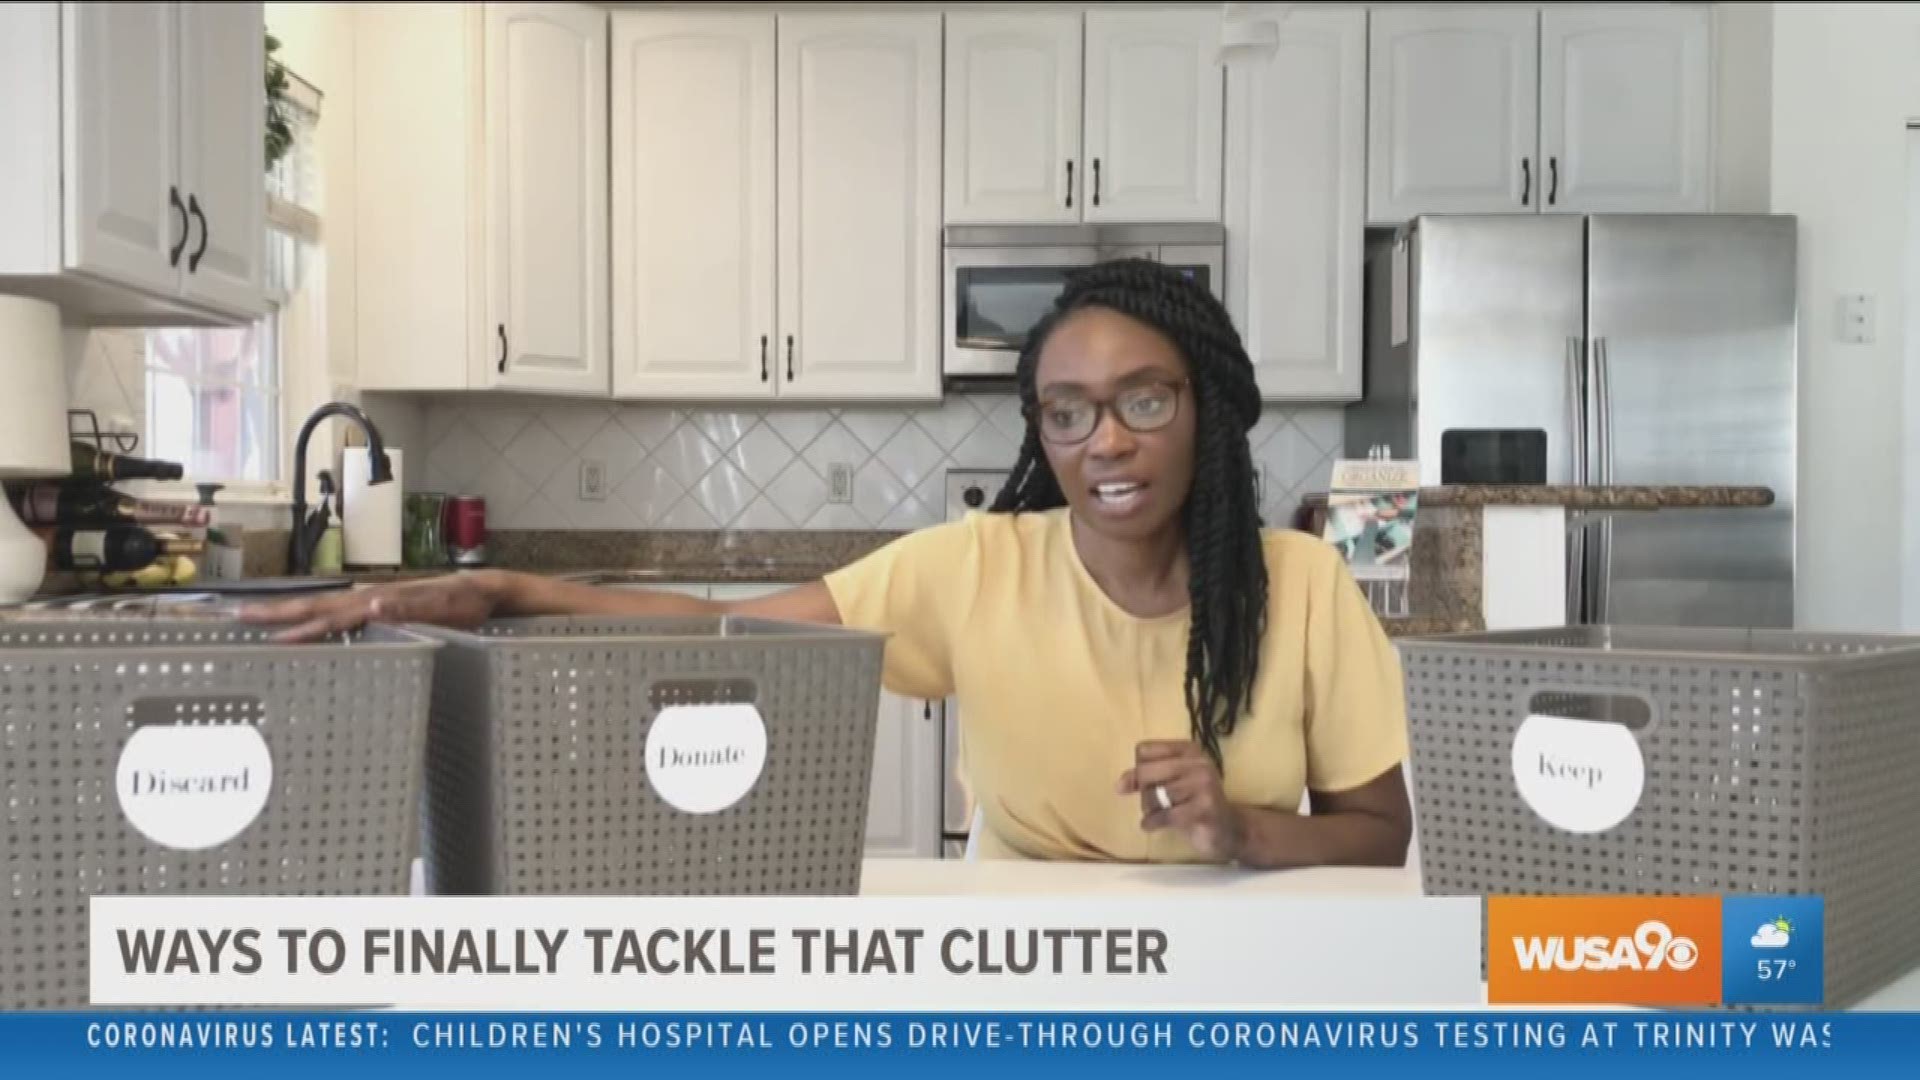 Organizing expert, Janelle Williams, shares four simple steps on how to declutter your home while social distancing.